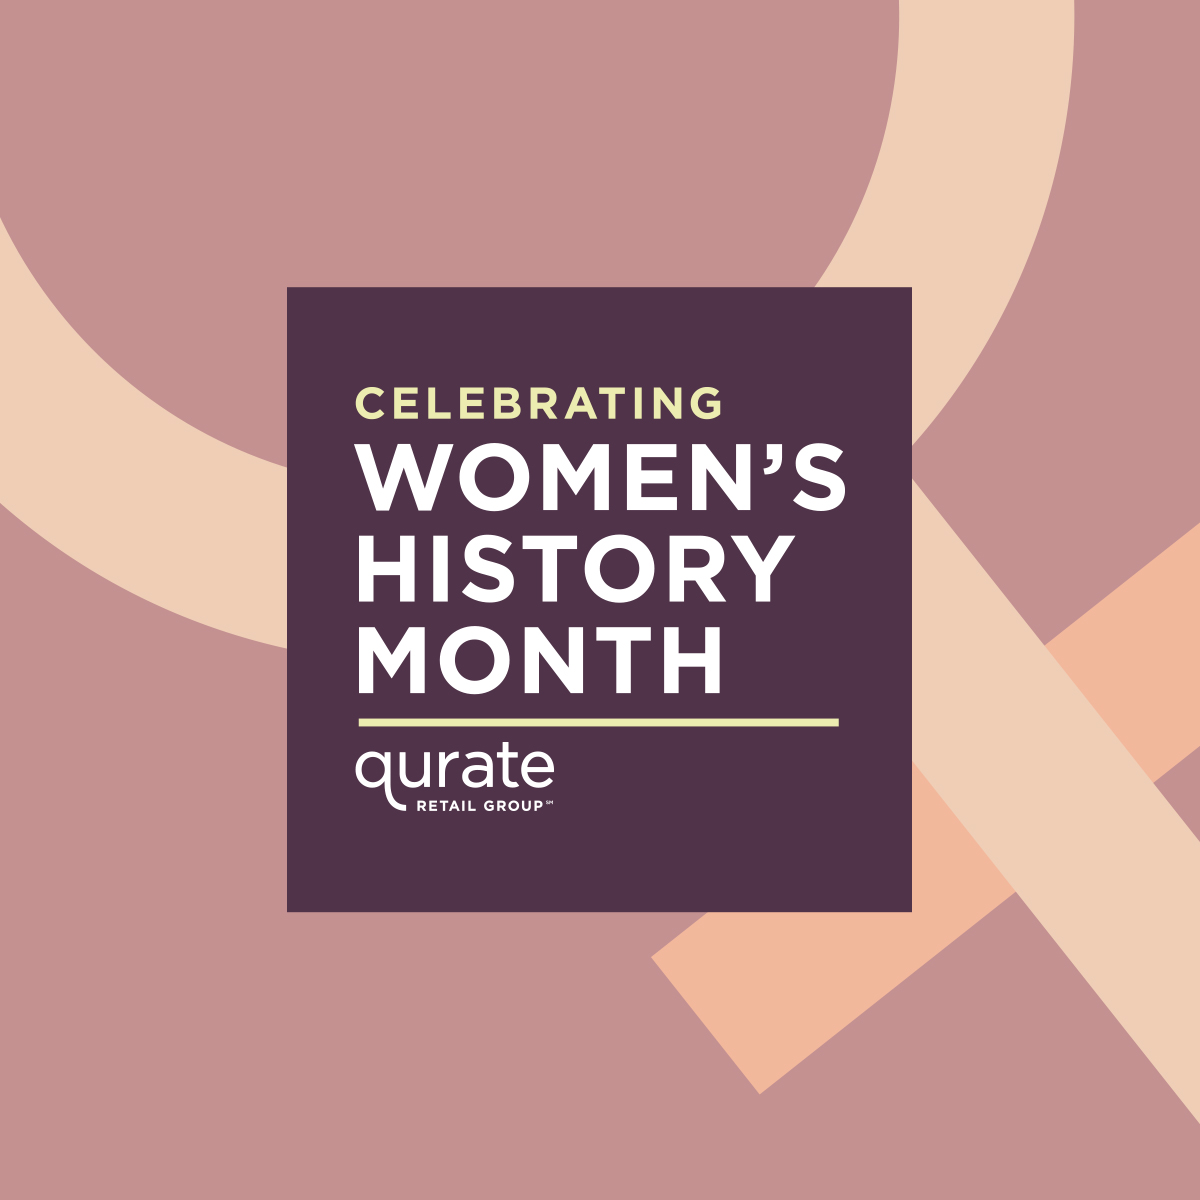 banner reading, "CELEBRATING WOMEN'S HISTORY MONTH" with Qurate Retail Group's logo